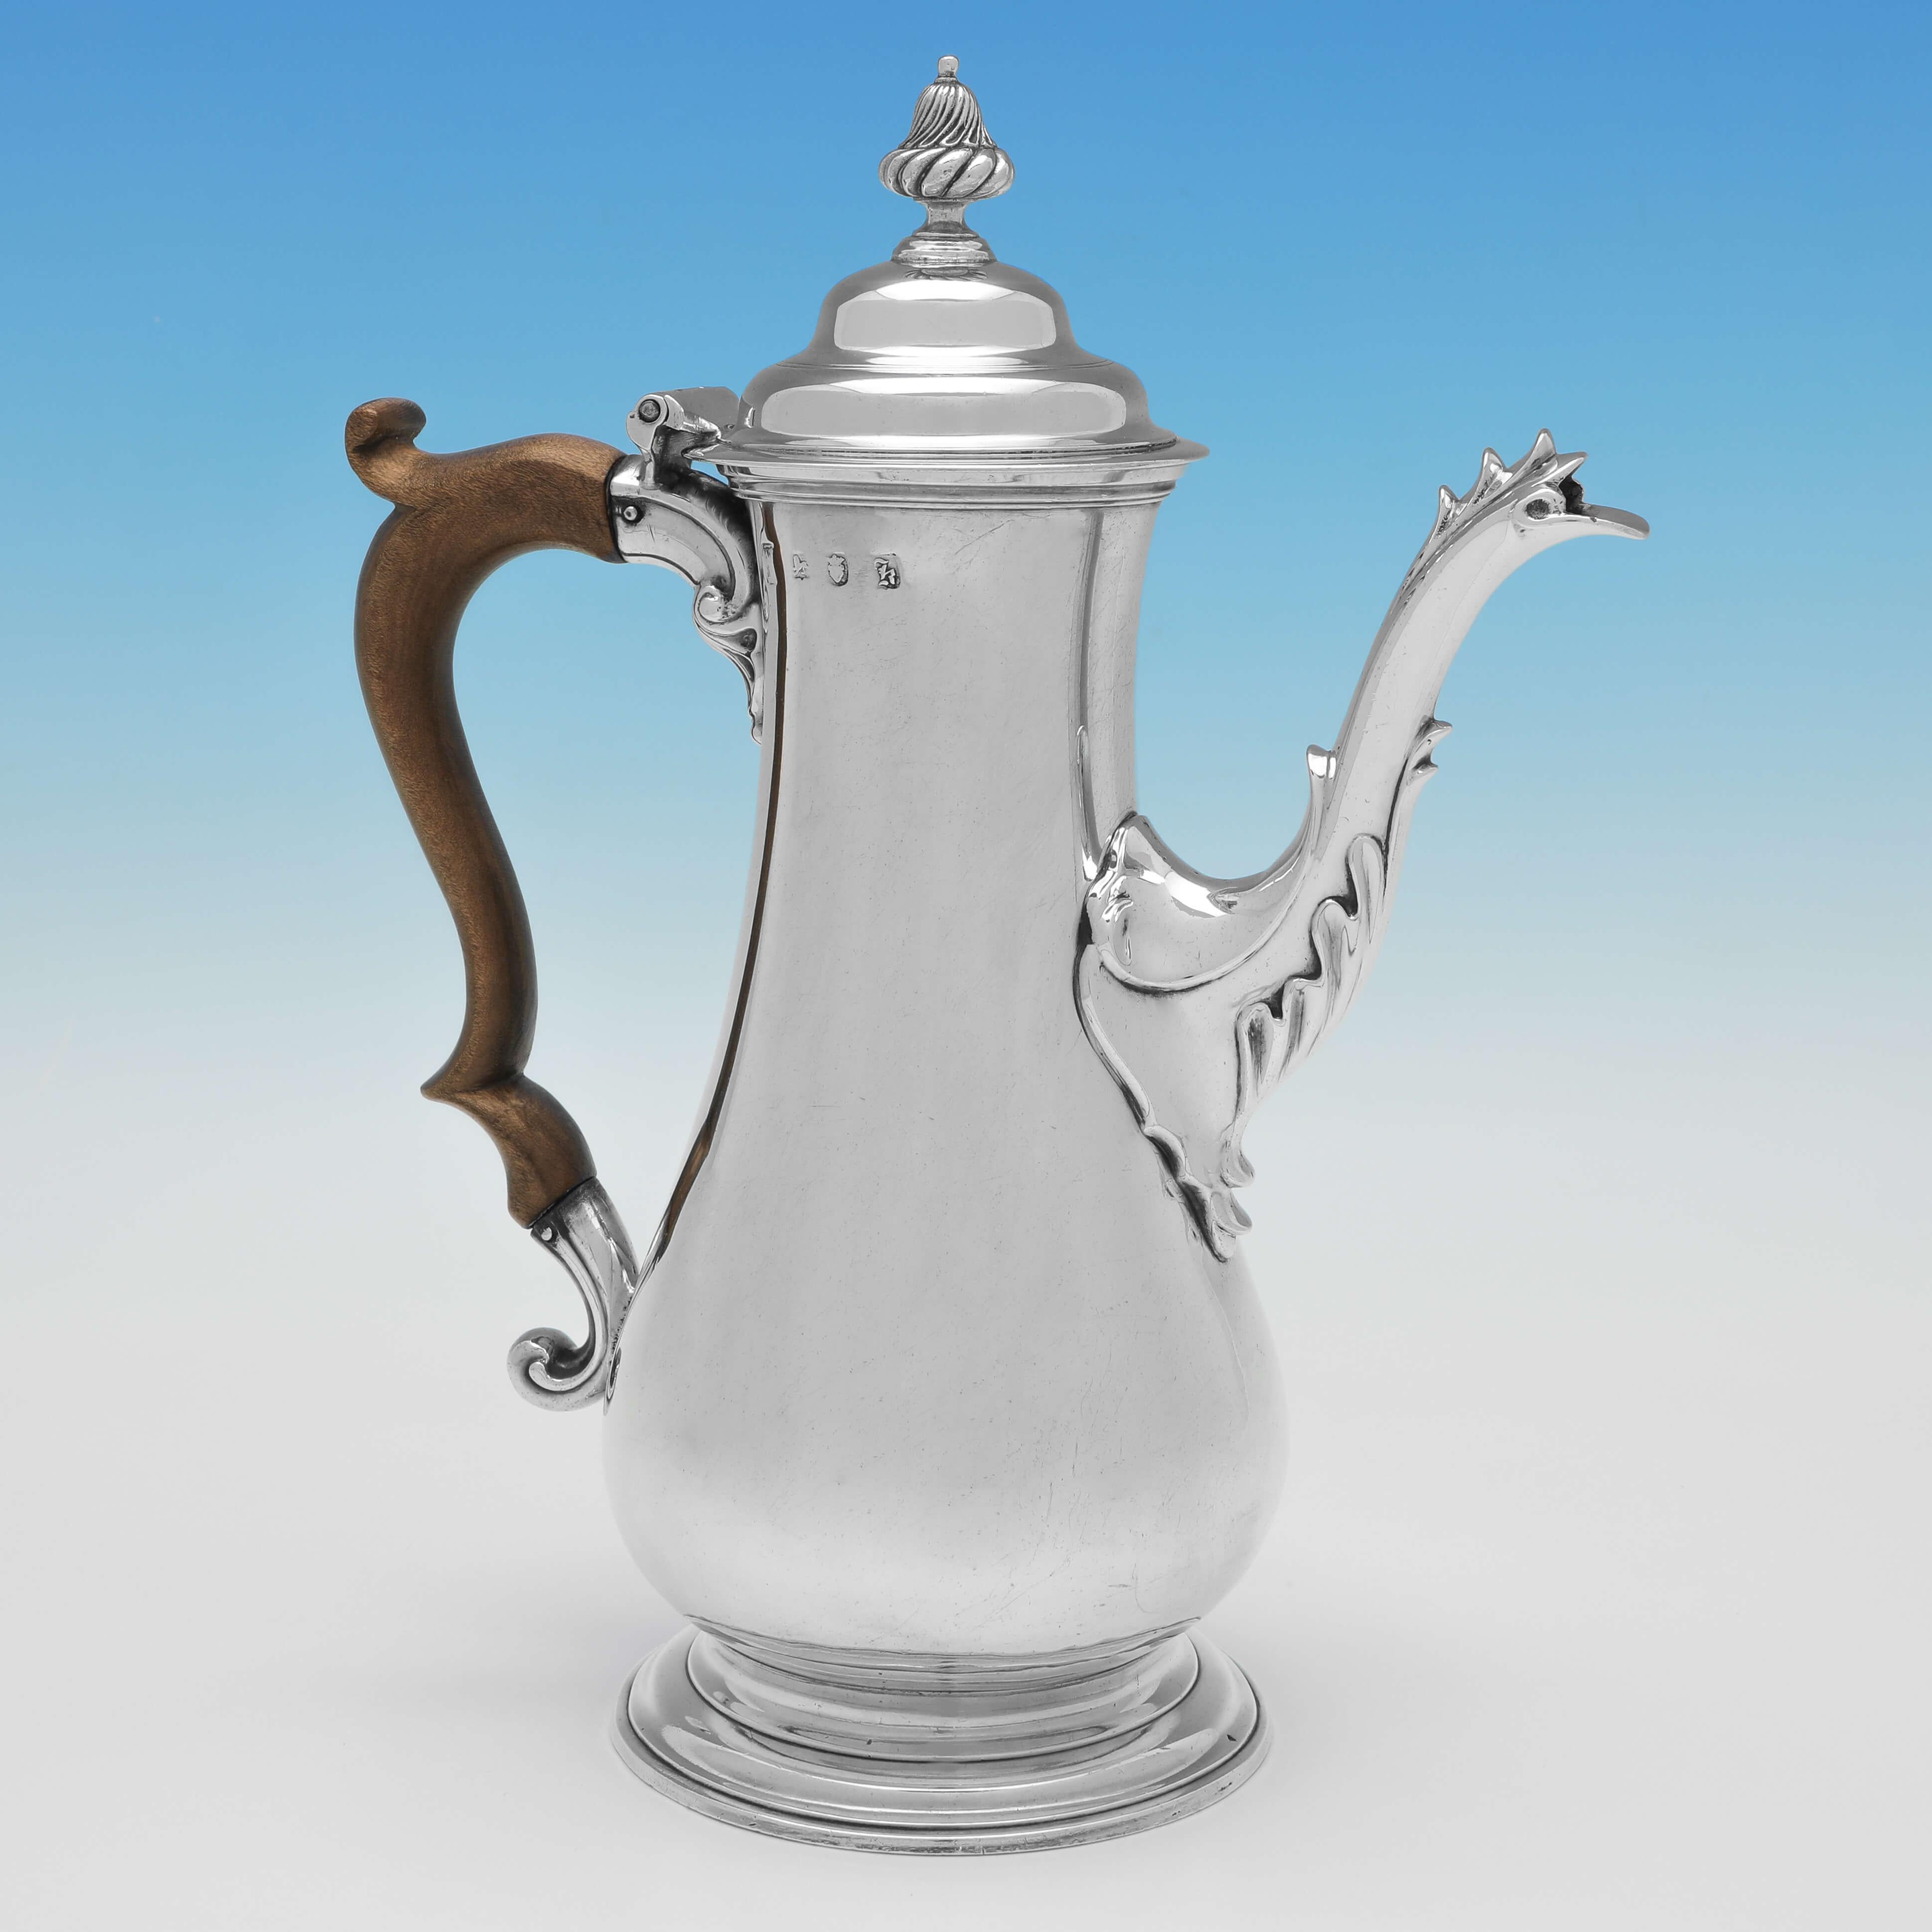 Hallmarked in London in 1765 by William & James Priest, this handsome, George III, Antique Sterling Silver Coffee Pot, has a plain body and lid, a wooden scroll handle, and acanthus detailing to the spout. 

The coffee pot measures 10.5